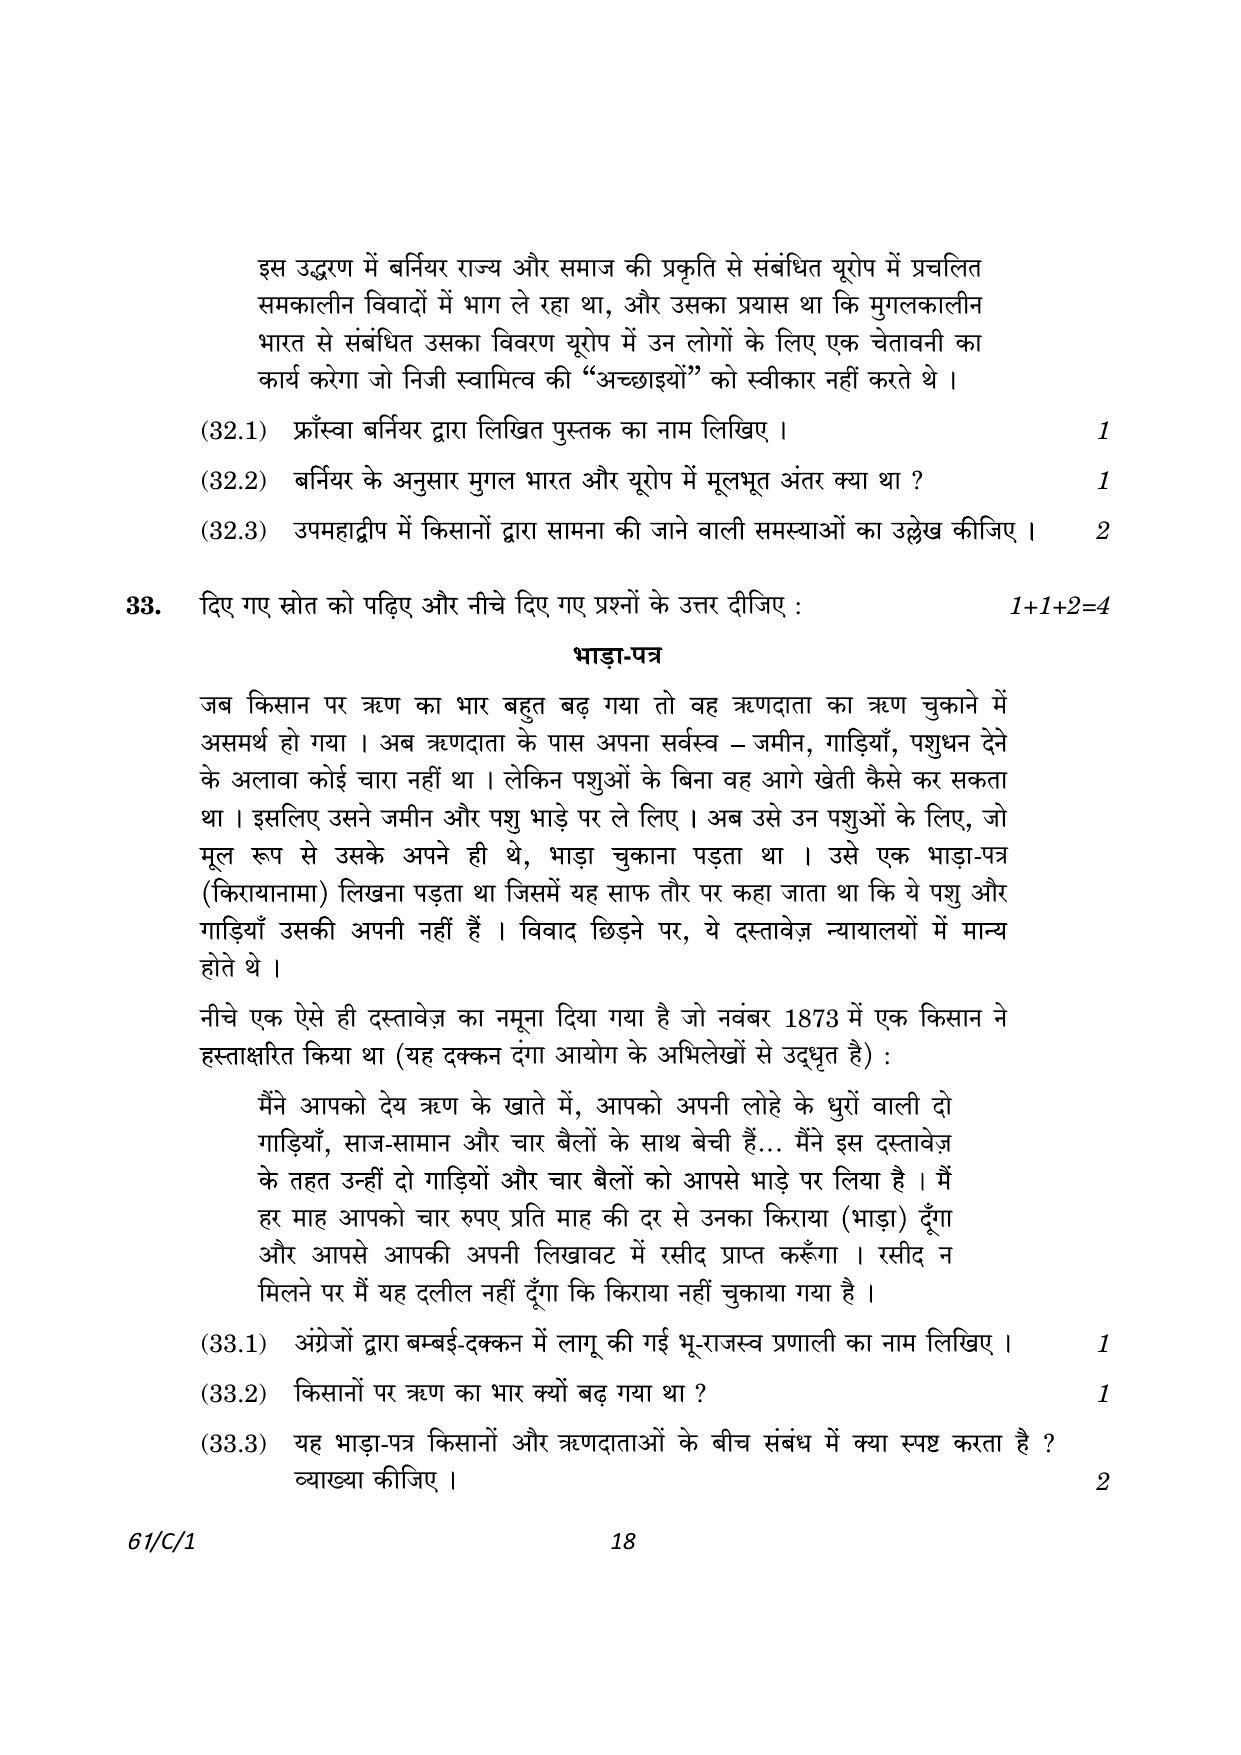 CBSE Class 12 61-1 History 2023 (Compartment) Question Paper - Page 18